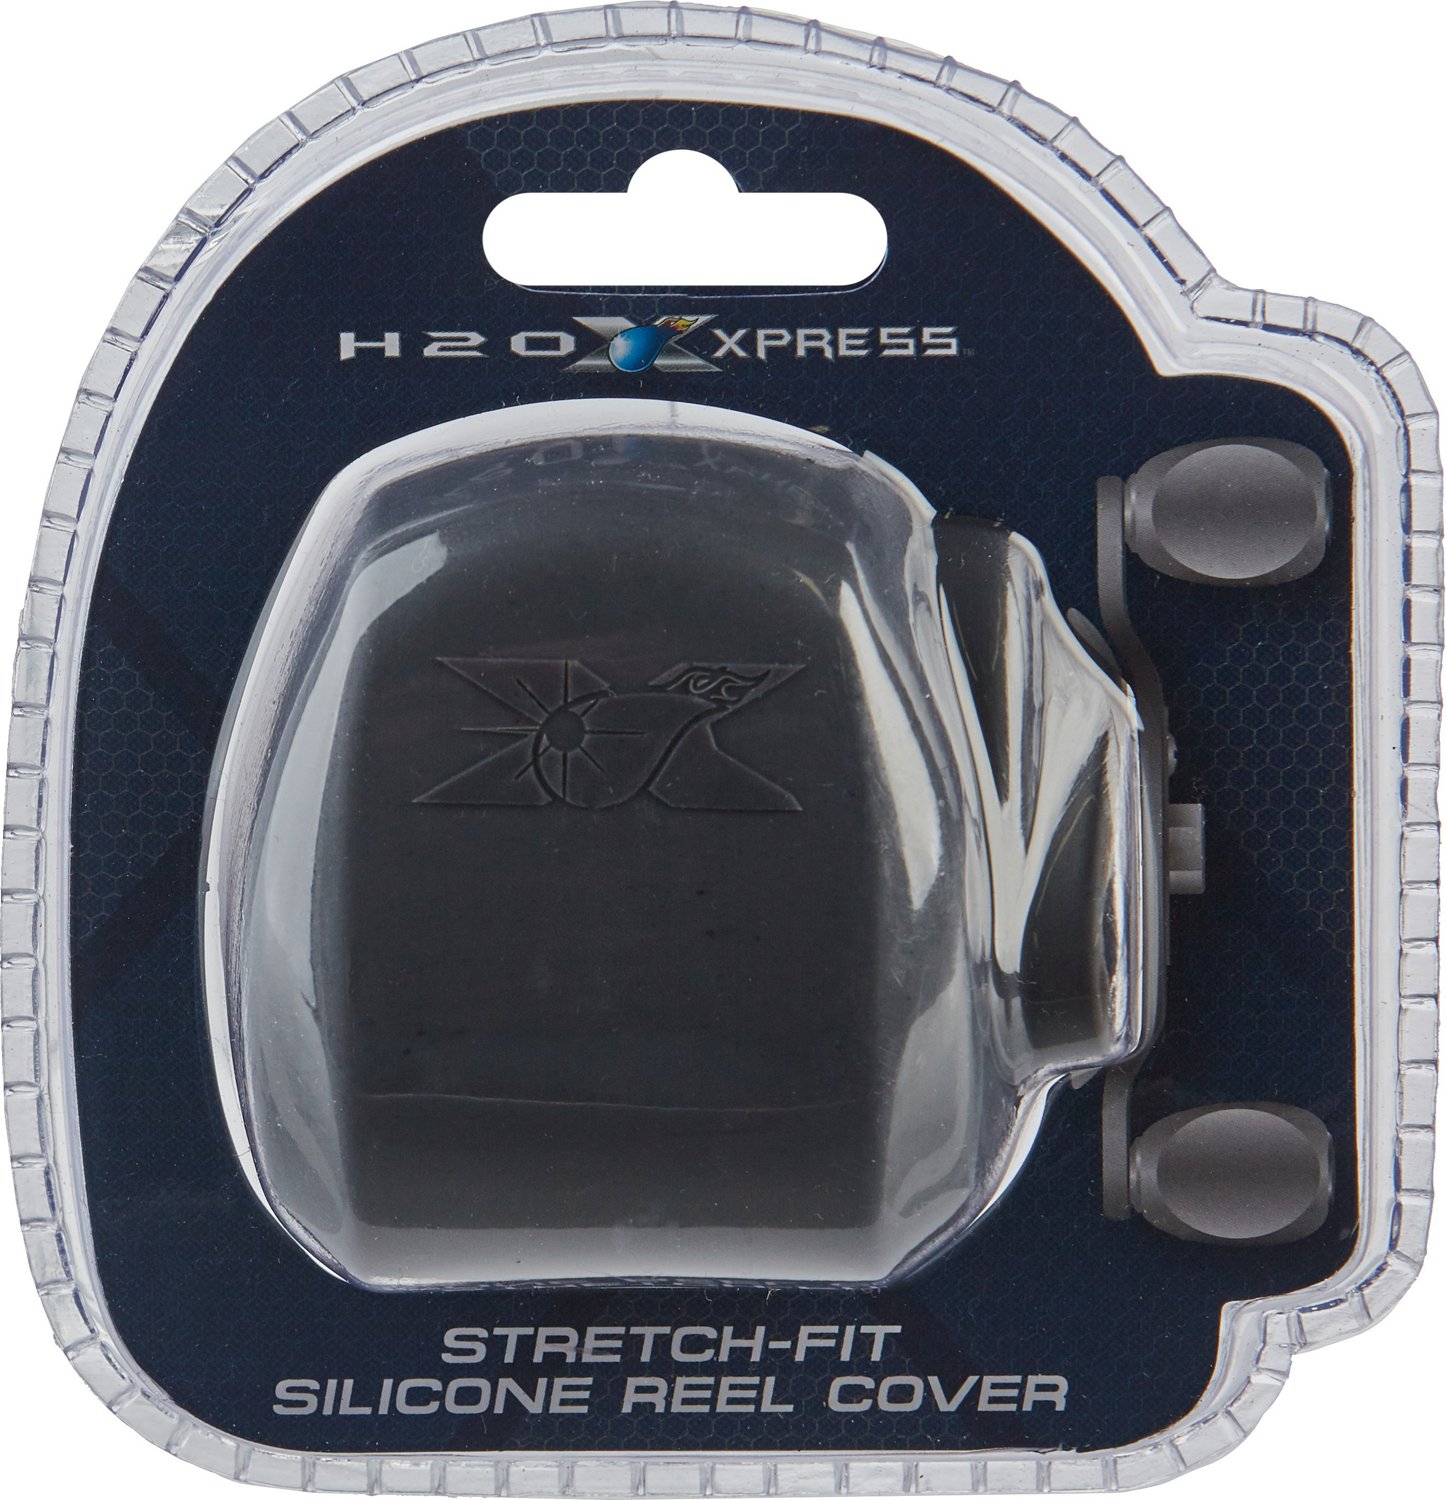 H2O XPRESS Stretch-Fit Silicone Reel Cover